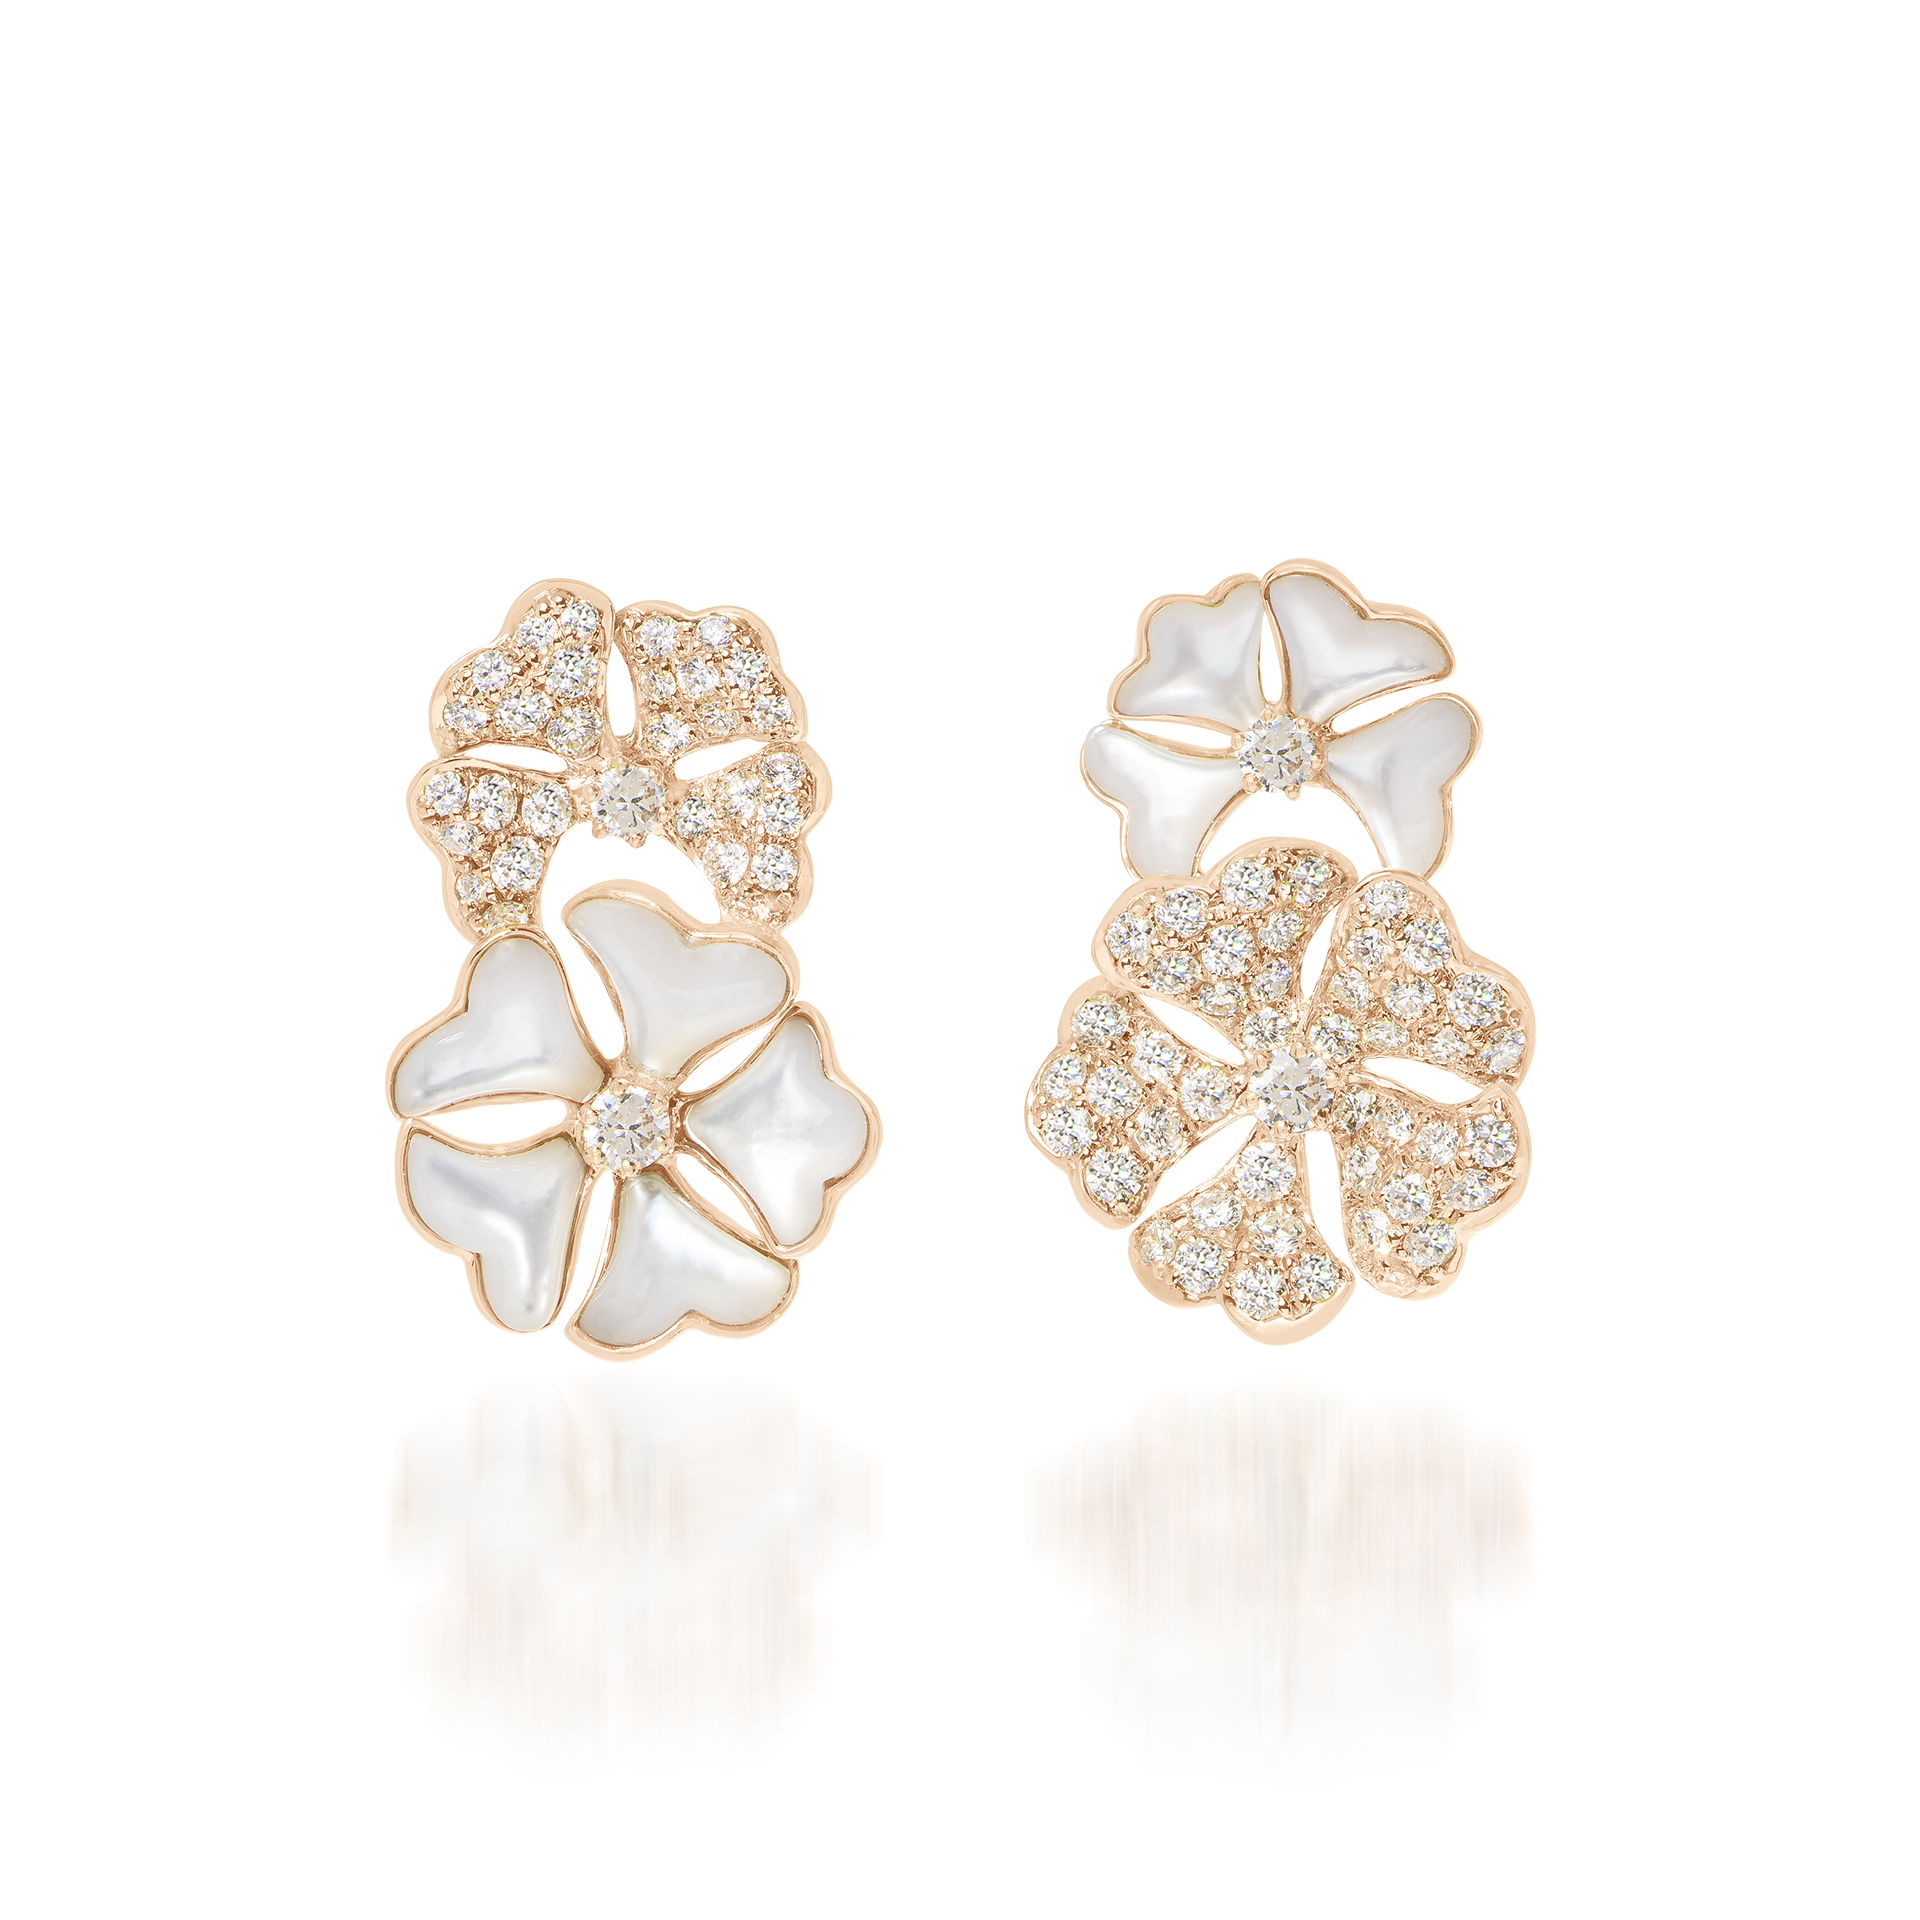 Bloom Diamond and White Mother-of-Pearl Double Bloom Earrings In 18K Rose Gold